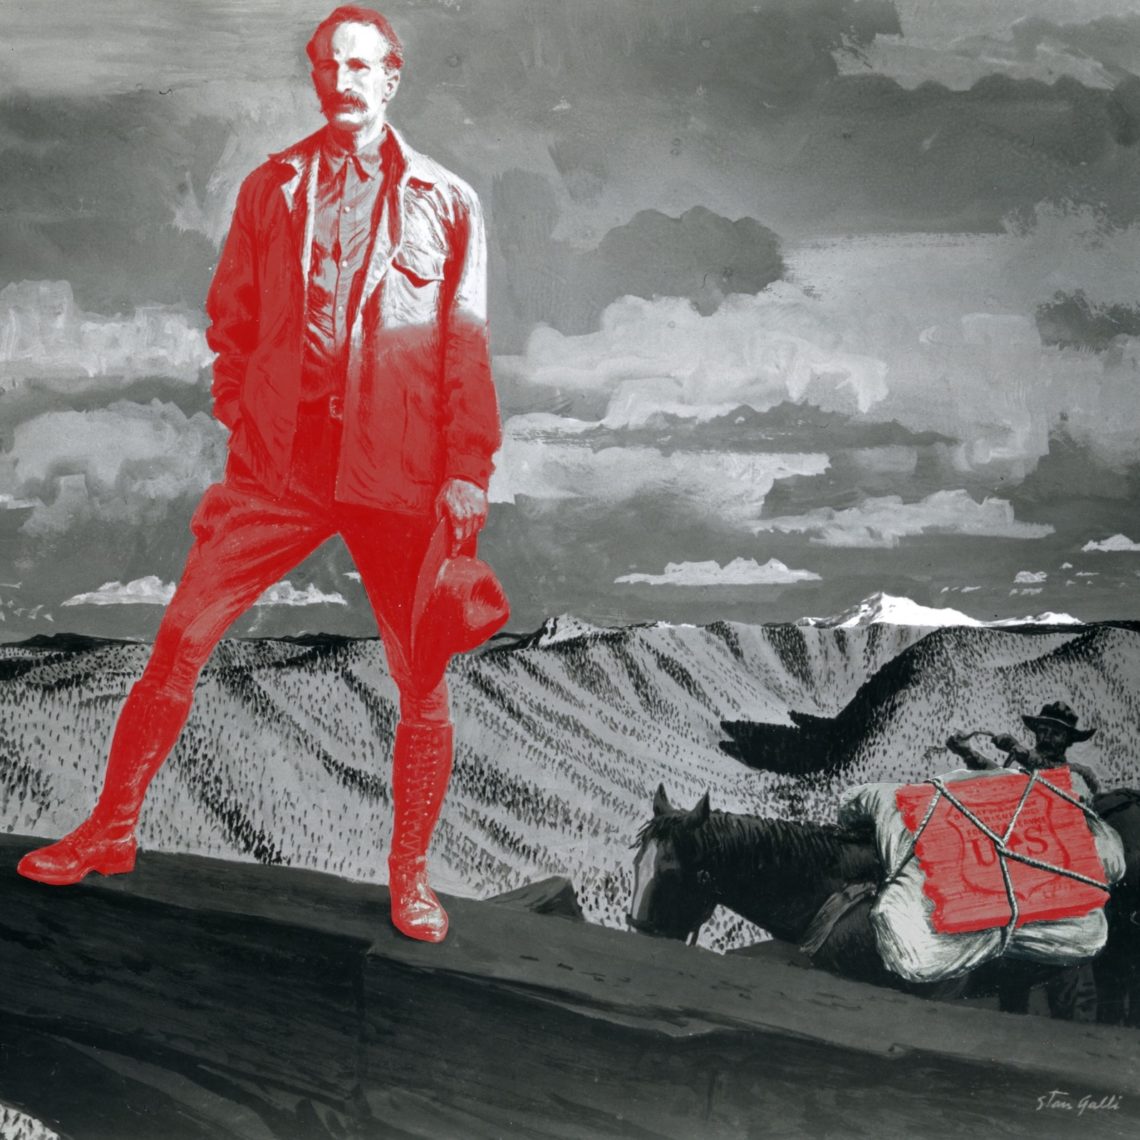 Season 5 art and image editing by Mara Guevarra. Episode image: Photo of a painting of Gifford Pinchot by artist Stan Galli, 1955, with image editing by Mara Guevarra. The painting was commissioned by the Weyerhauser Timber Company for an ad campaign promoting “productive” forest management. Image courtesy of the Forest History Society, Durham, North Carolina.